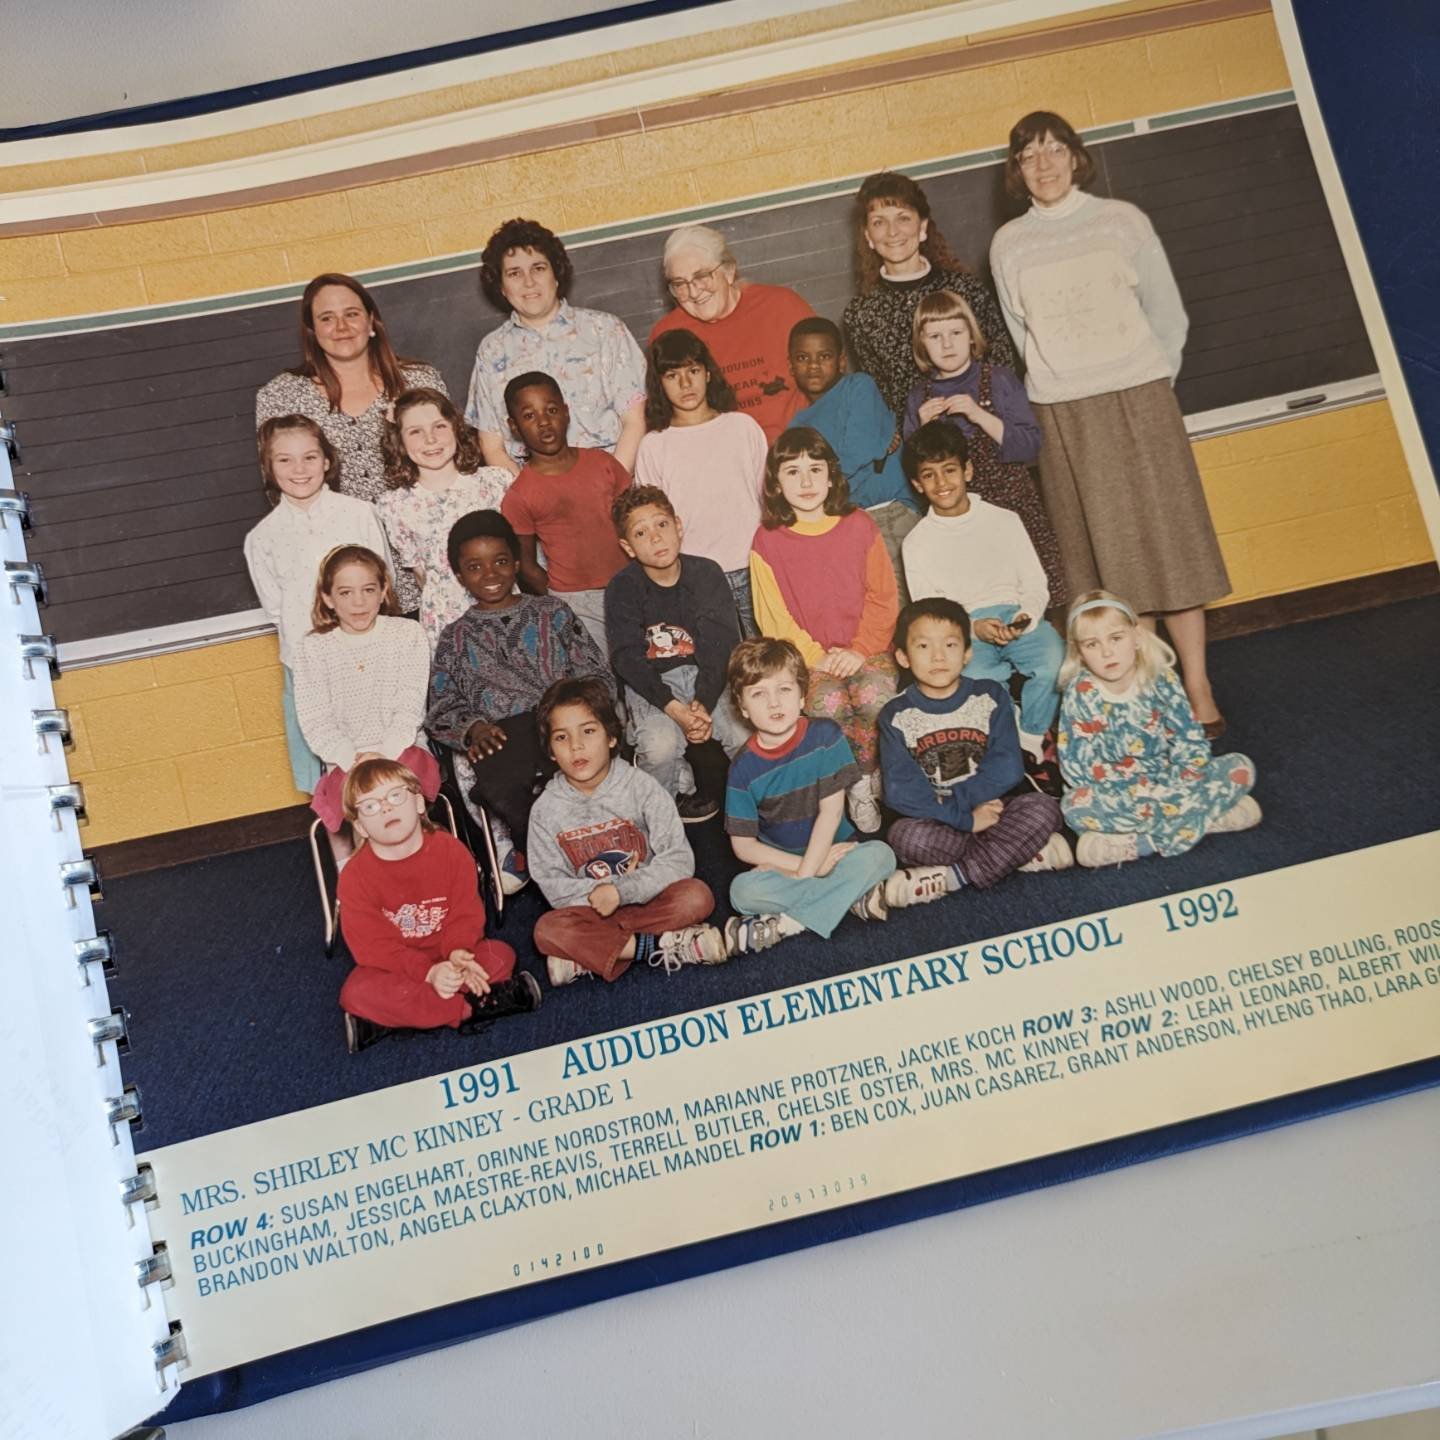 Lake Harriet Lower Campus (formerly Audubon) hosted its 100th anniversary today and it was incredible to see generations of families coming out to celebrate a beloved school. I even found my class picture in the 1991-92 yearbook! I have so many fond 